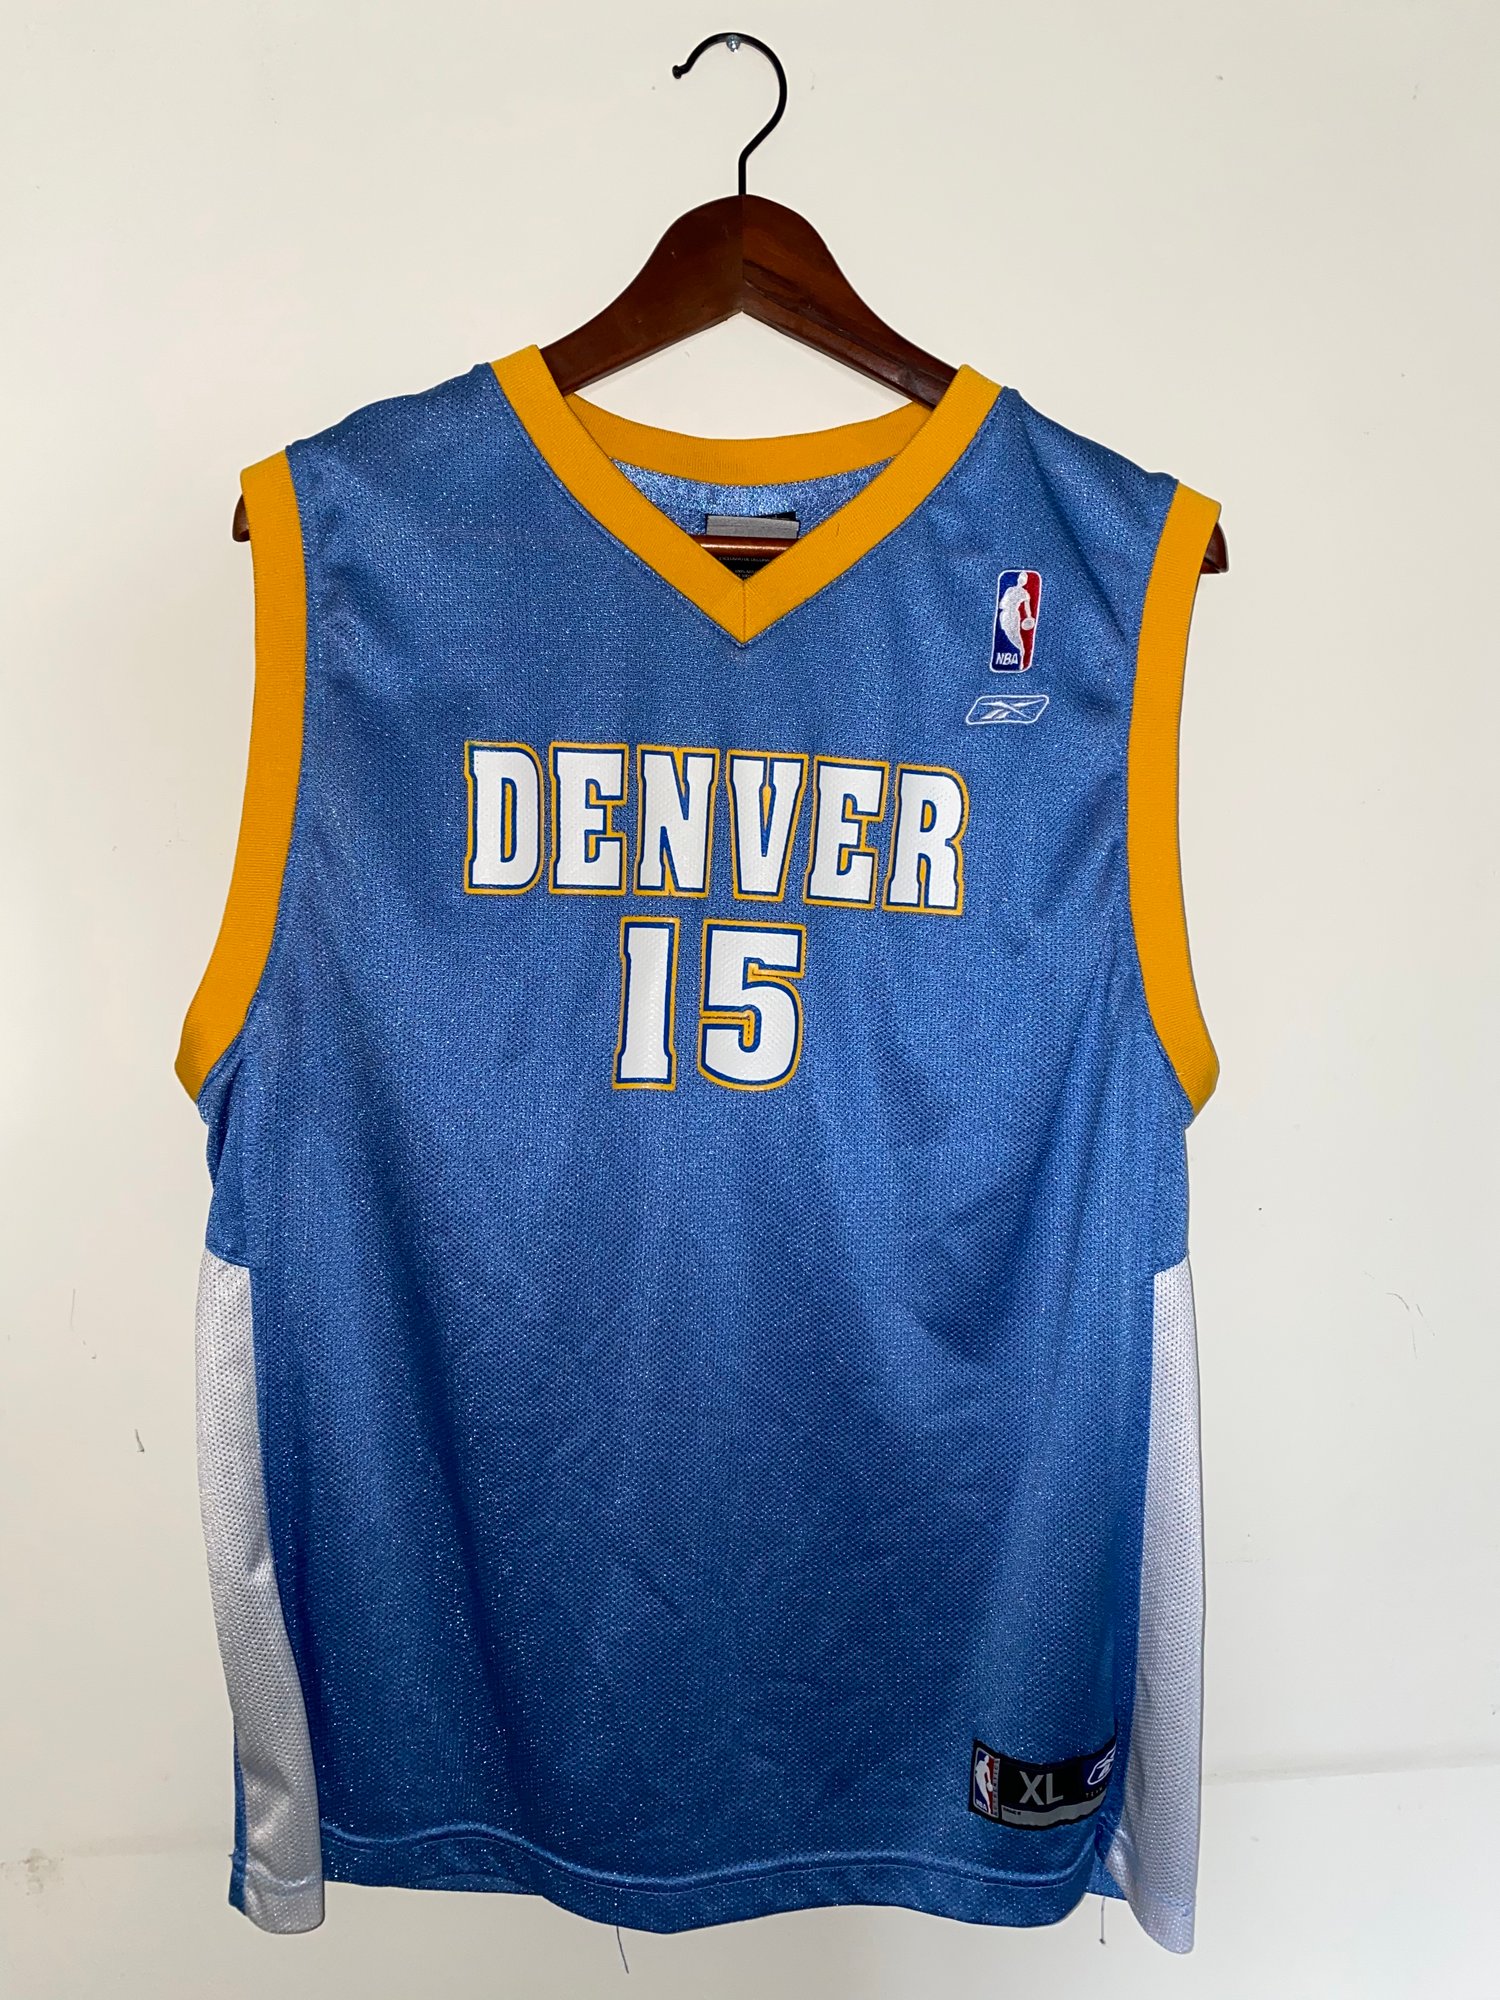 Authentic NBA Jersey Denver Nuggets Reebok Carmelo Anthony Hardwood Classic  2XL